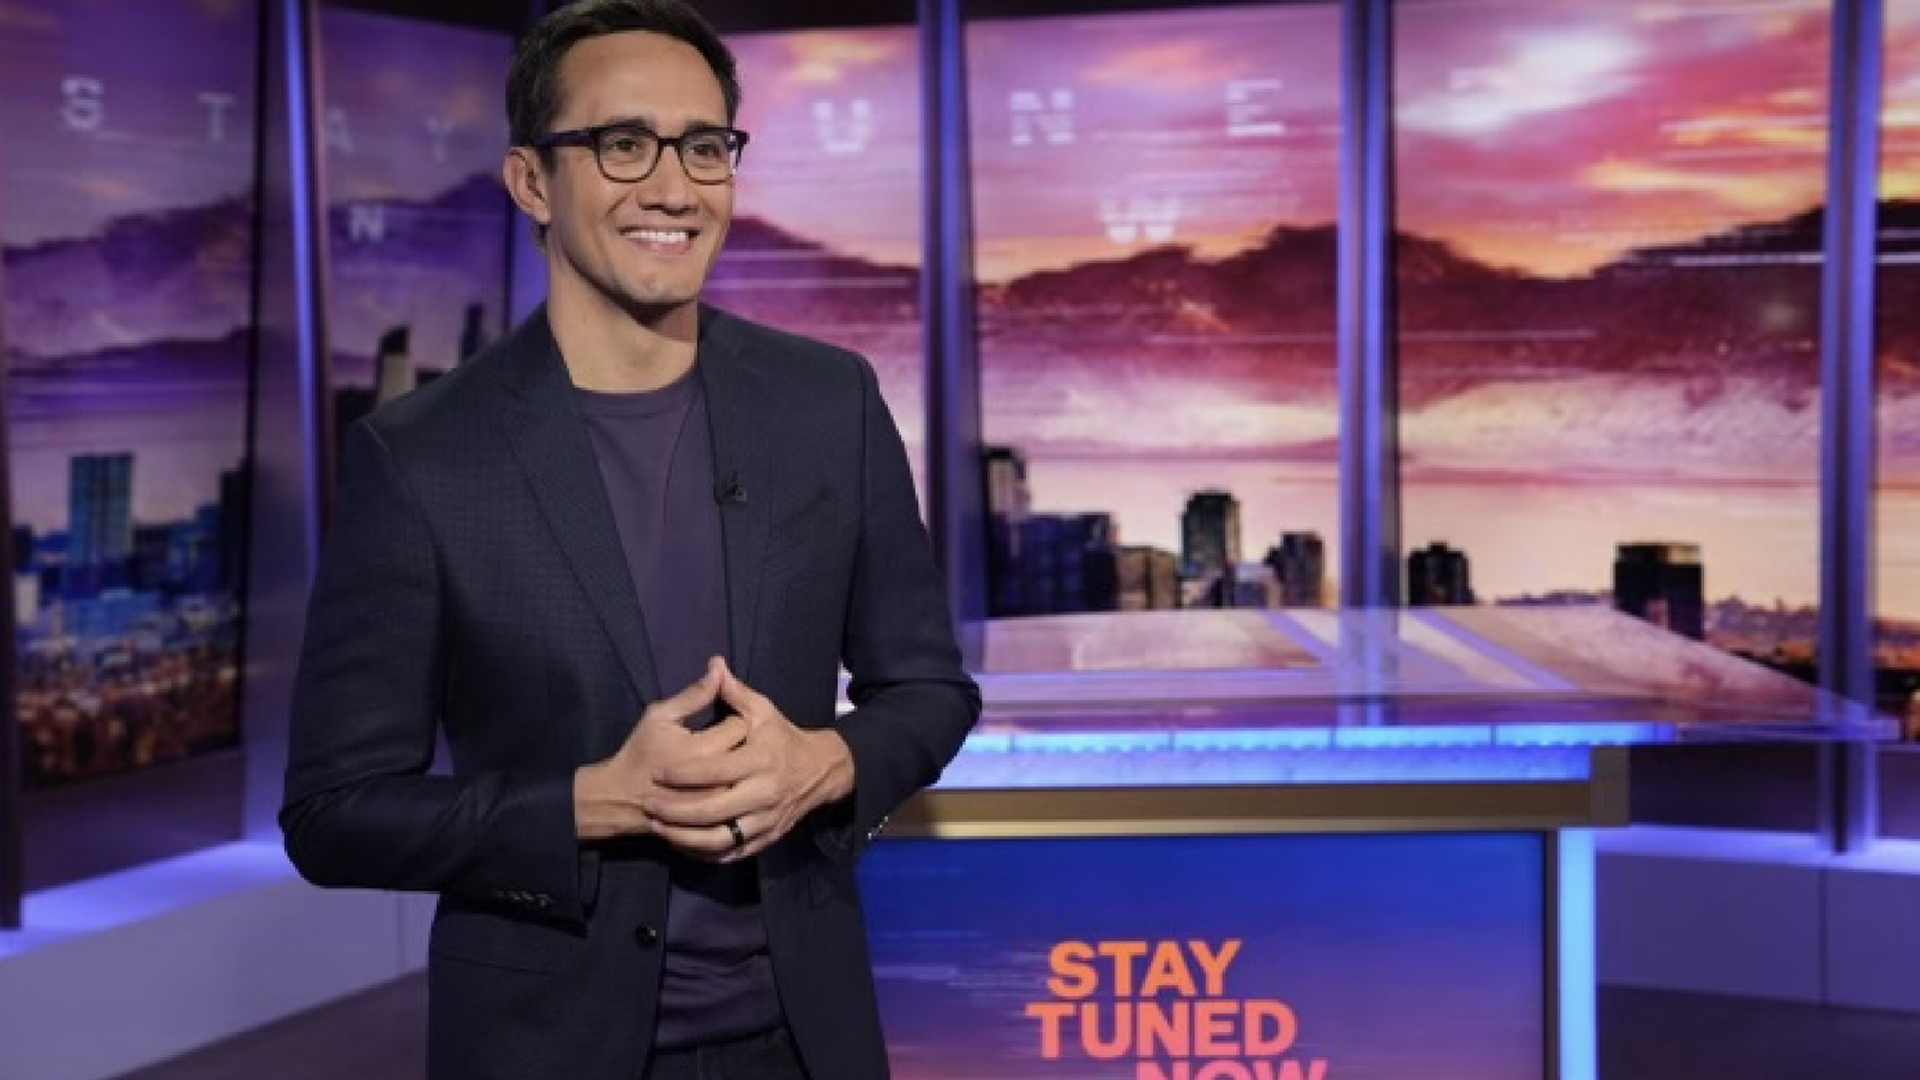 Gadi Schwartz, the anchor of Stay Tuned NOW, a new primetime streaming program on NBC News NOW. Photo: NBC News NOW.